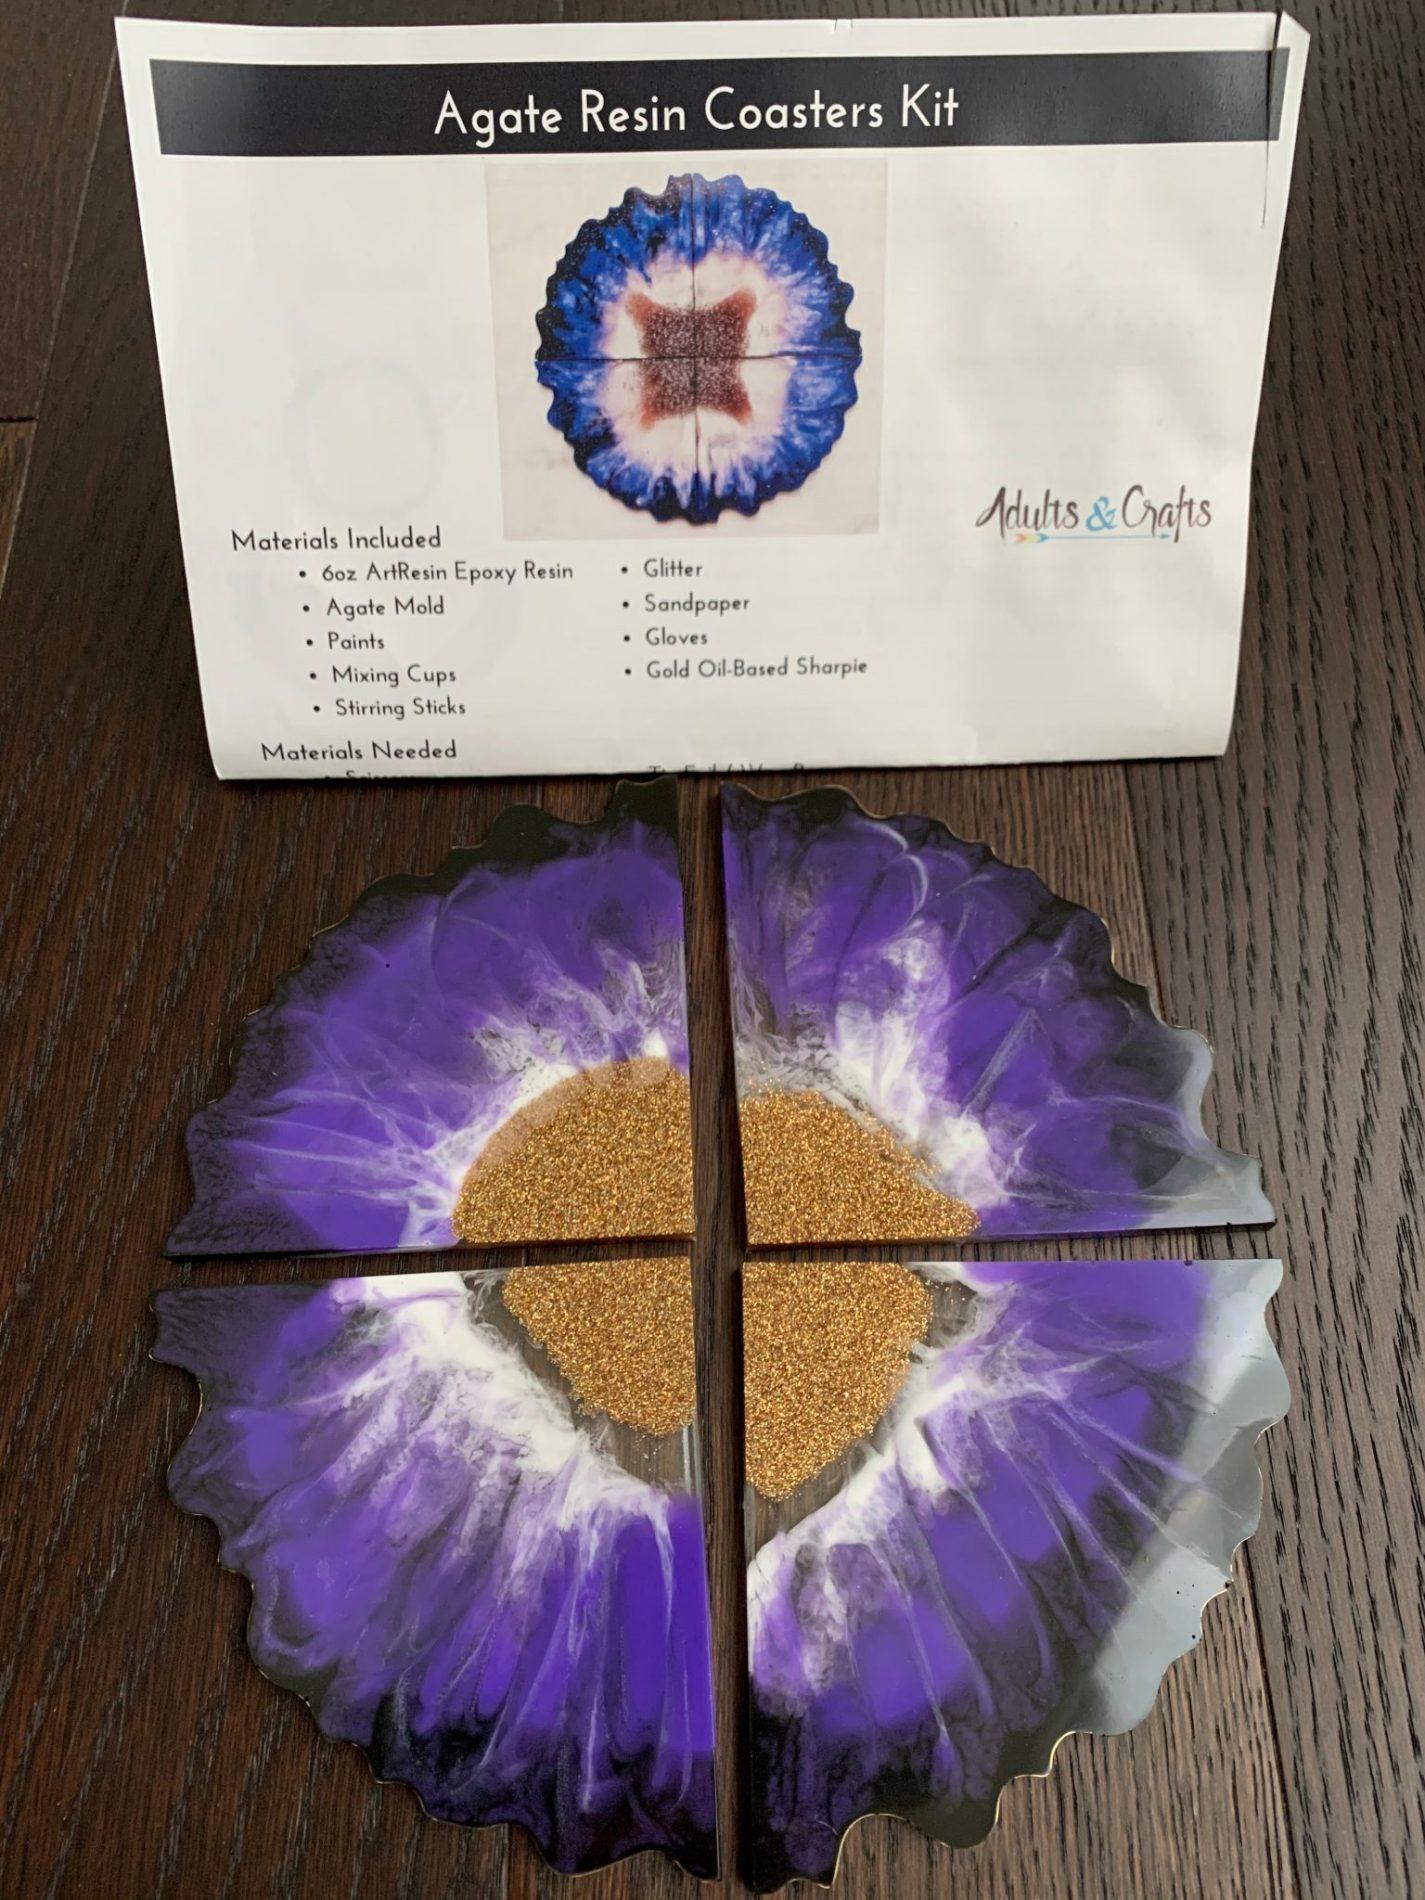 Adults & Crafts Review - Agate Resin Coasters Kit - Subscription Box  Ramblings